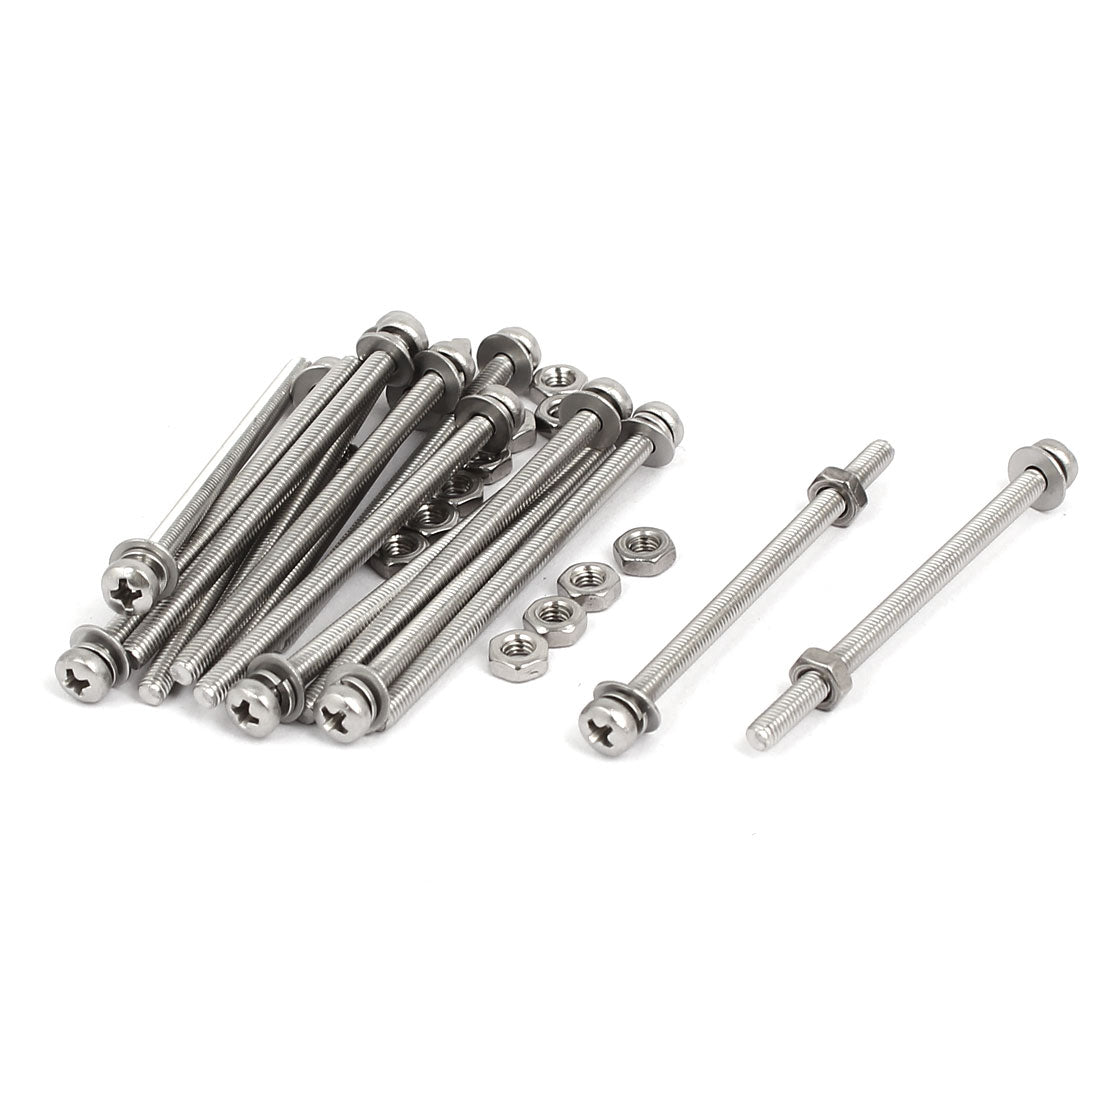 uxcell Uxcell M3 x 50mm 304 Stainless Steel Phillips Pan Head Screws Nuts w Washers 15 Sets